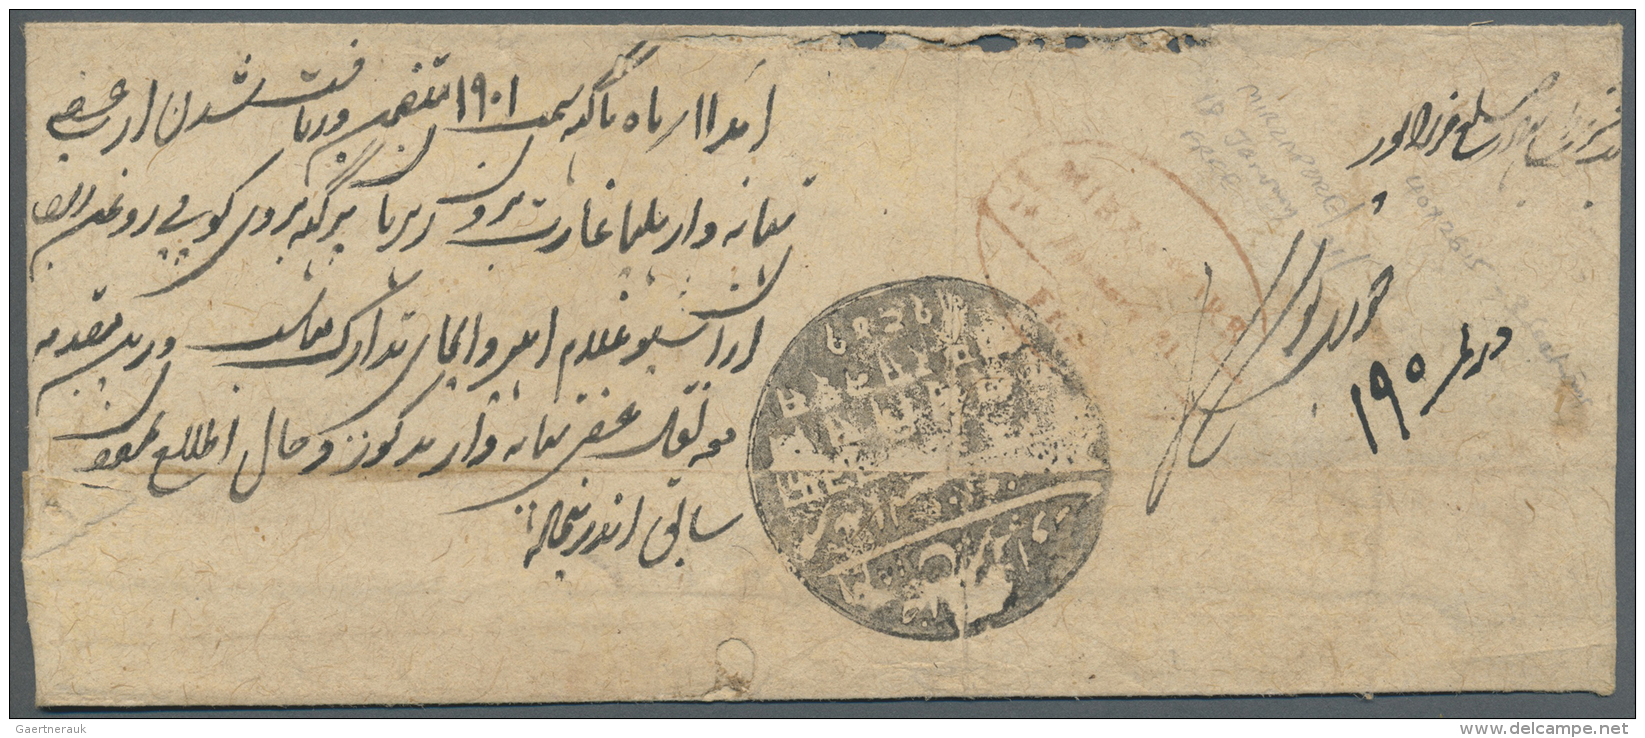 Indien - Vorphilatelie: 1843, Cover From Mirzapore To Raja Of Rewah With 3 Page Letter (little Moth Affected) Enclosure - ...-1852 Voorfilatelie